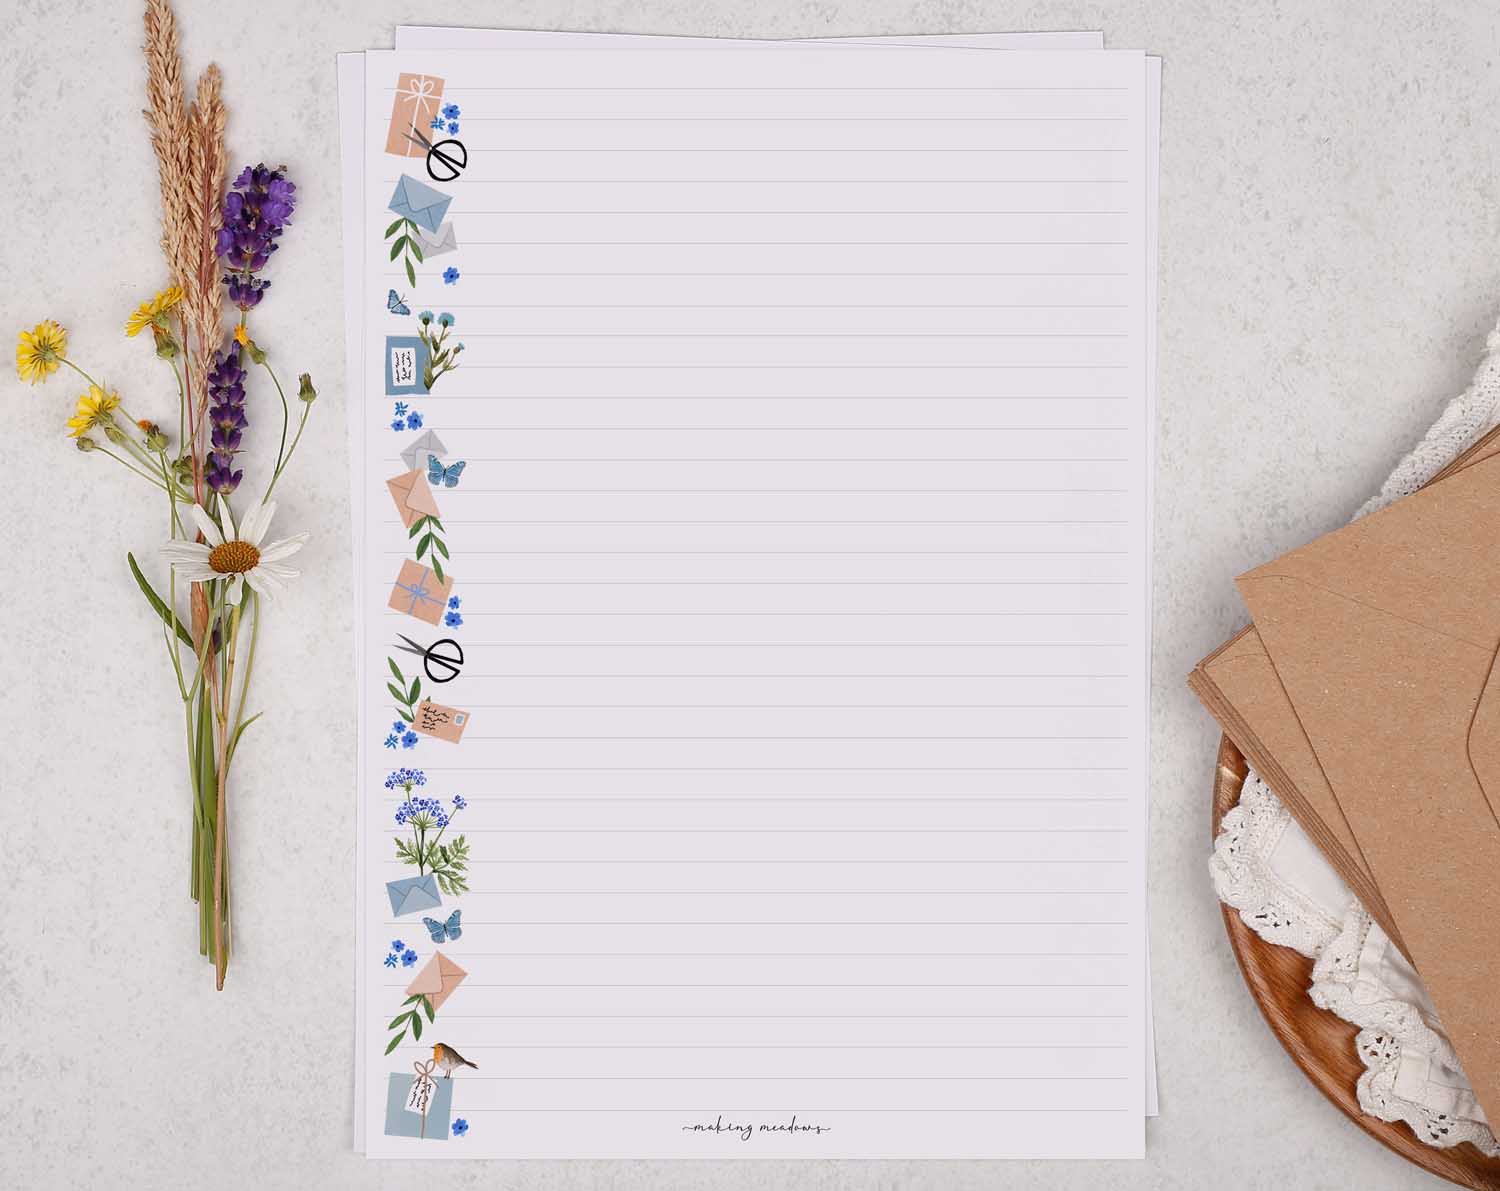 A4 letter writing paper sheets with a blue floral post border around the letter paper in a delicate flower pattern. 